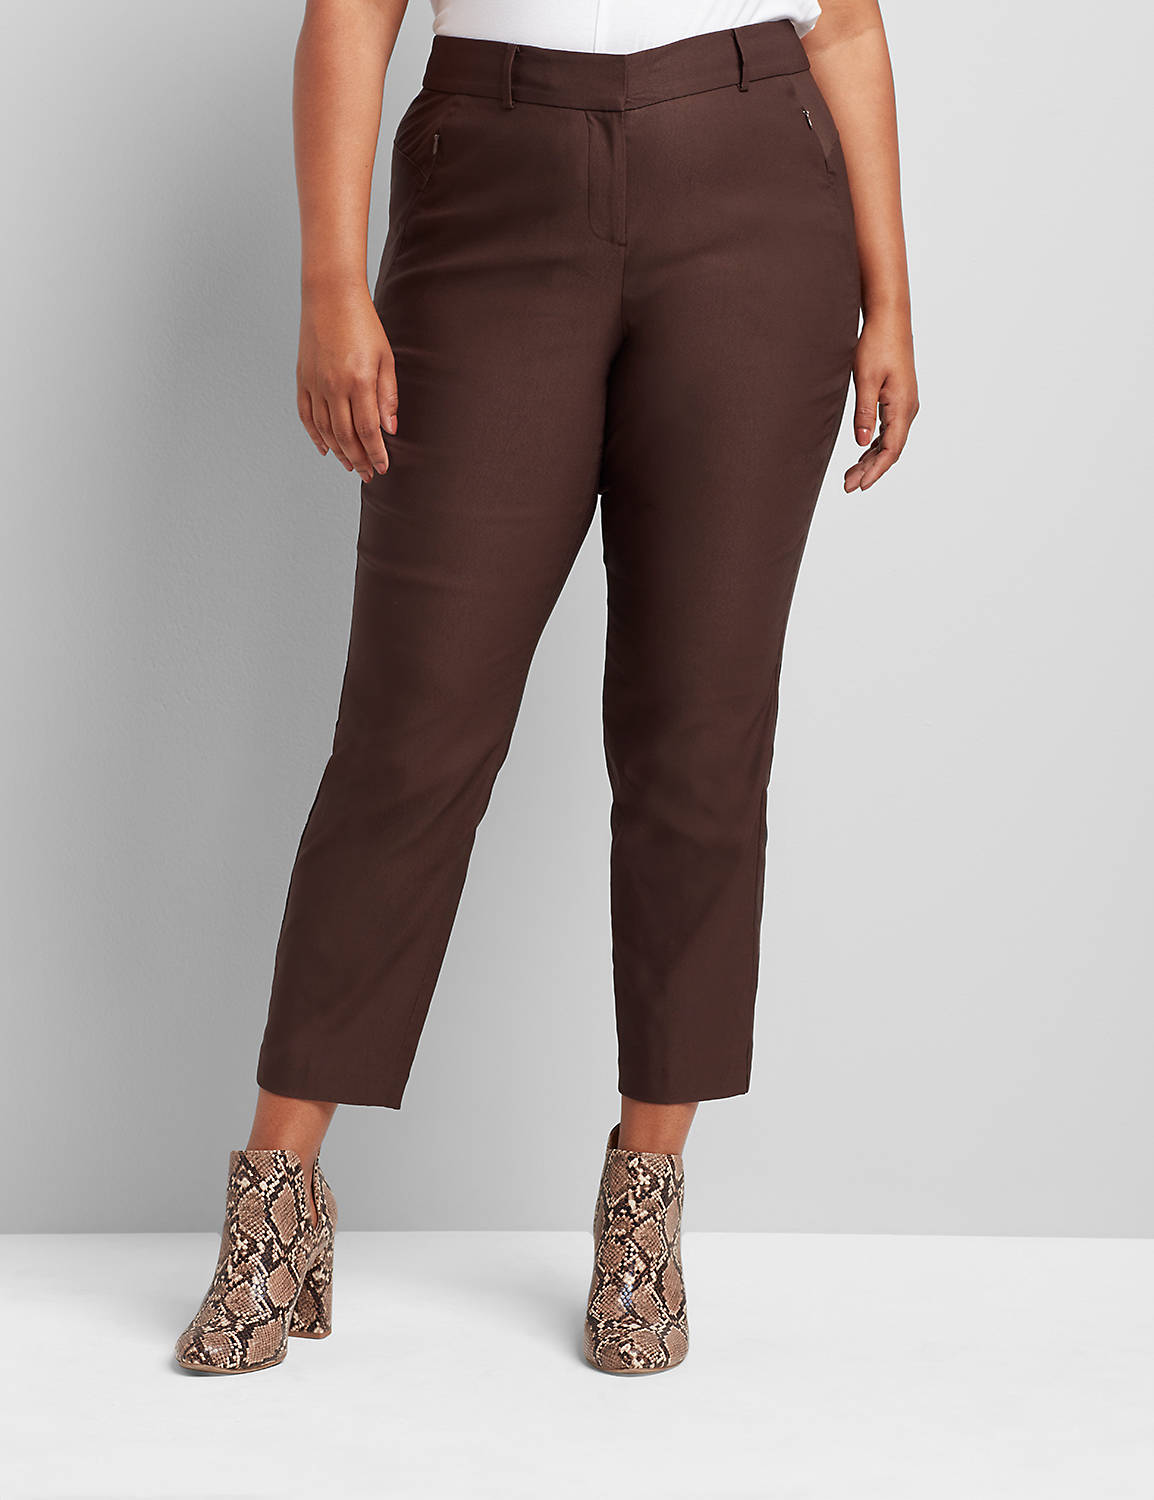 Allie Mid Rise Ankle 1117966:PANTONE Coffee Bean:12 Product Image 1